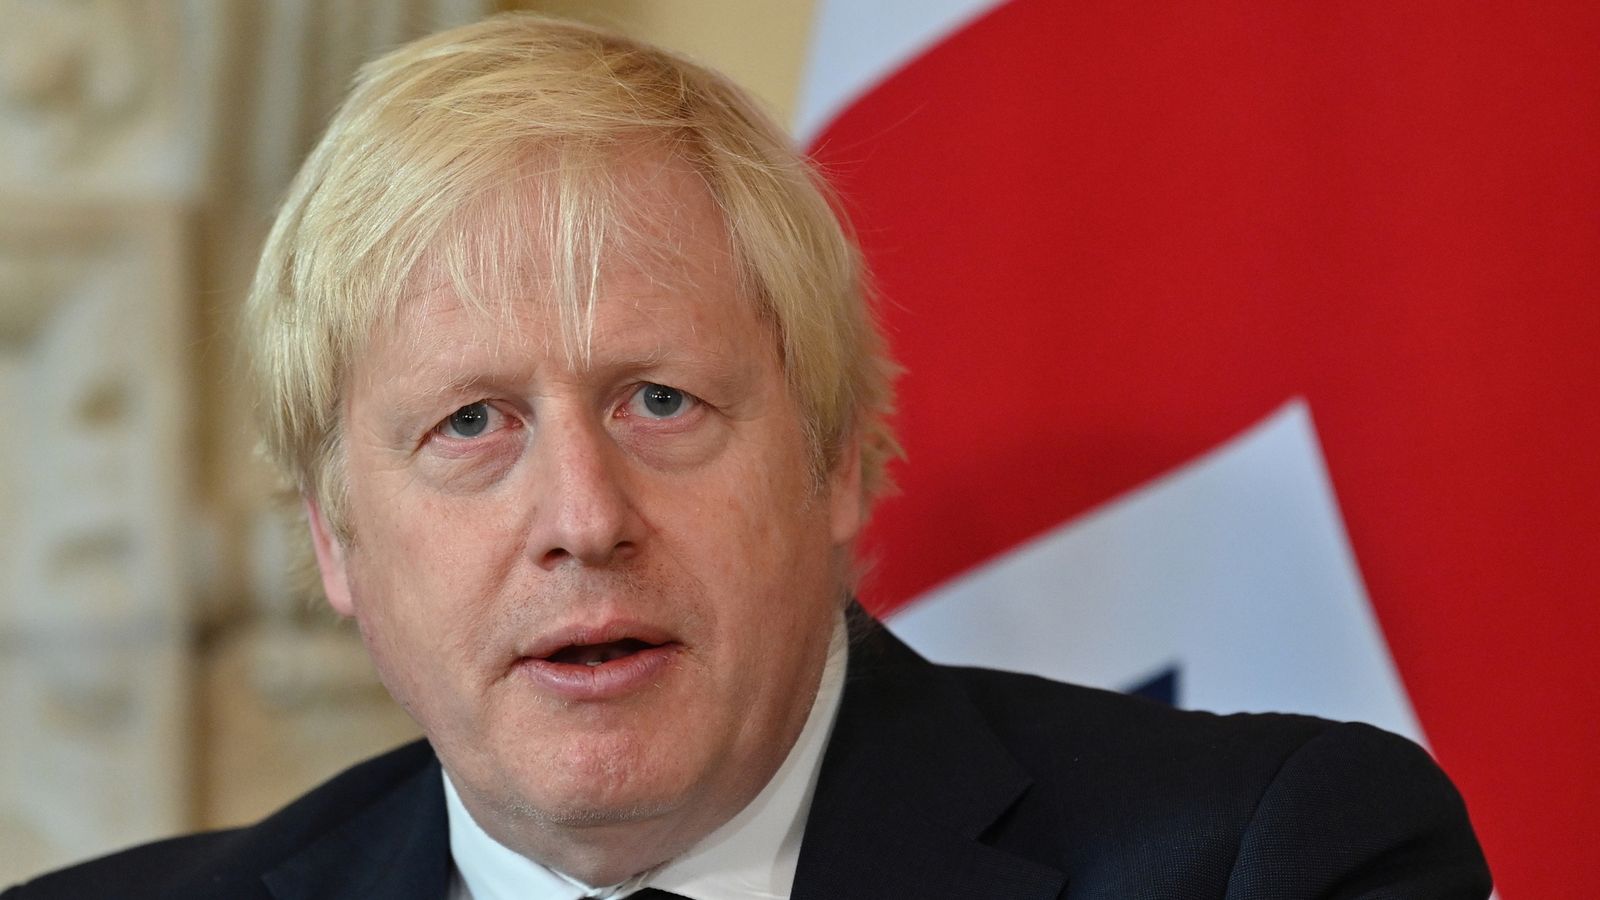 Boris Johnson says France needs to do more to tackle migrant crossings after more than 30 people die in dinghy sinking off Calais | Politics News | Sky News